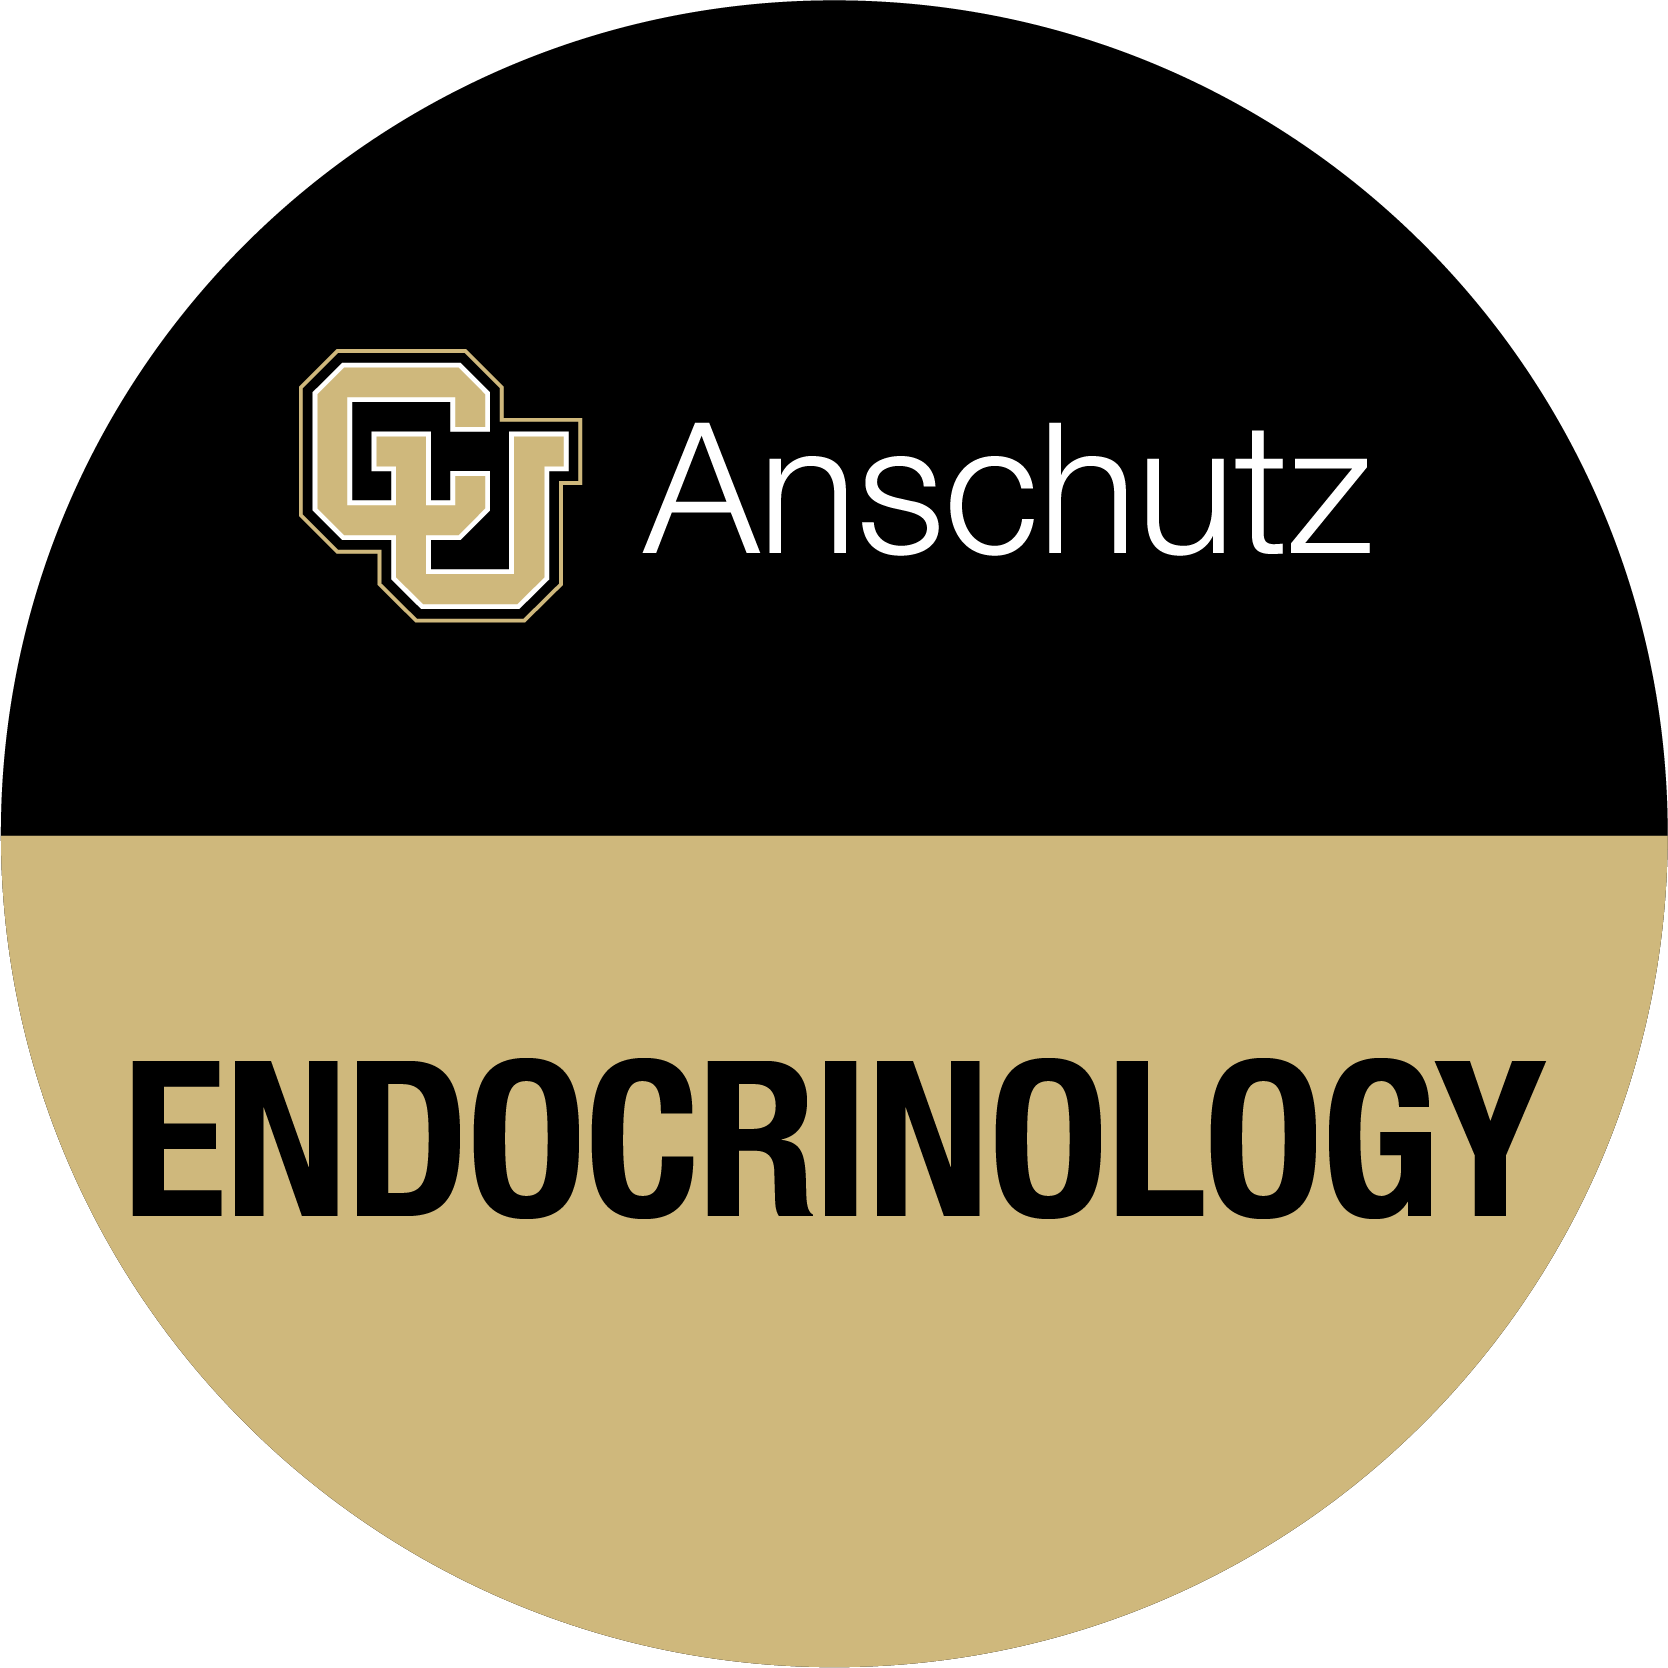 Official Twitter account of the University of Colorado Division of Endocrinology, Metabolism and Diabetes